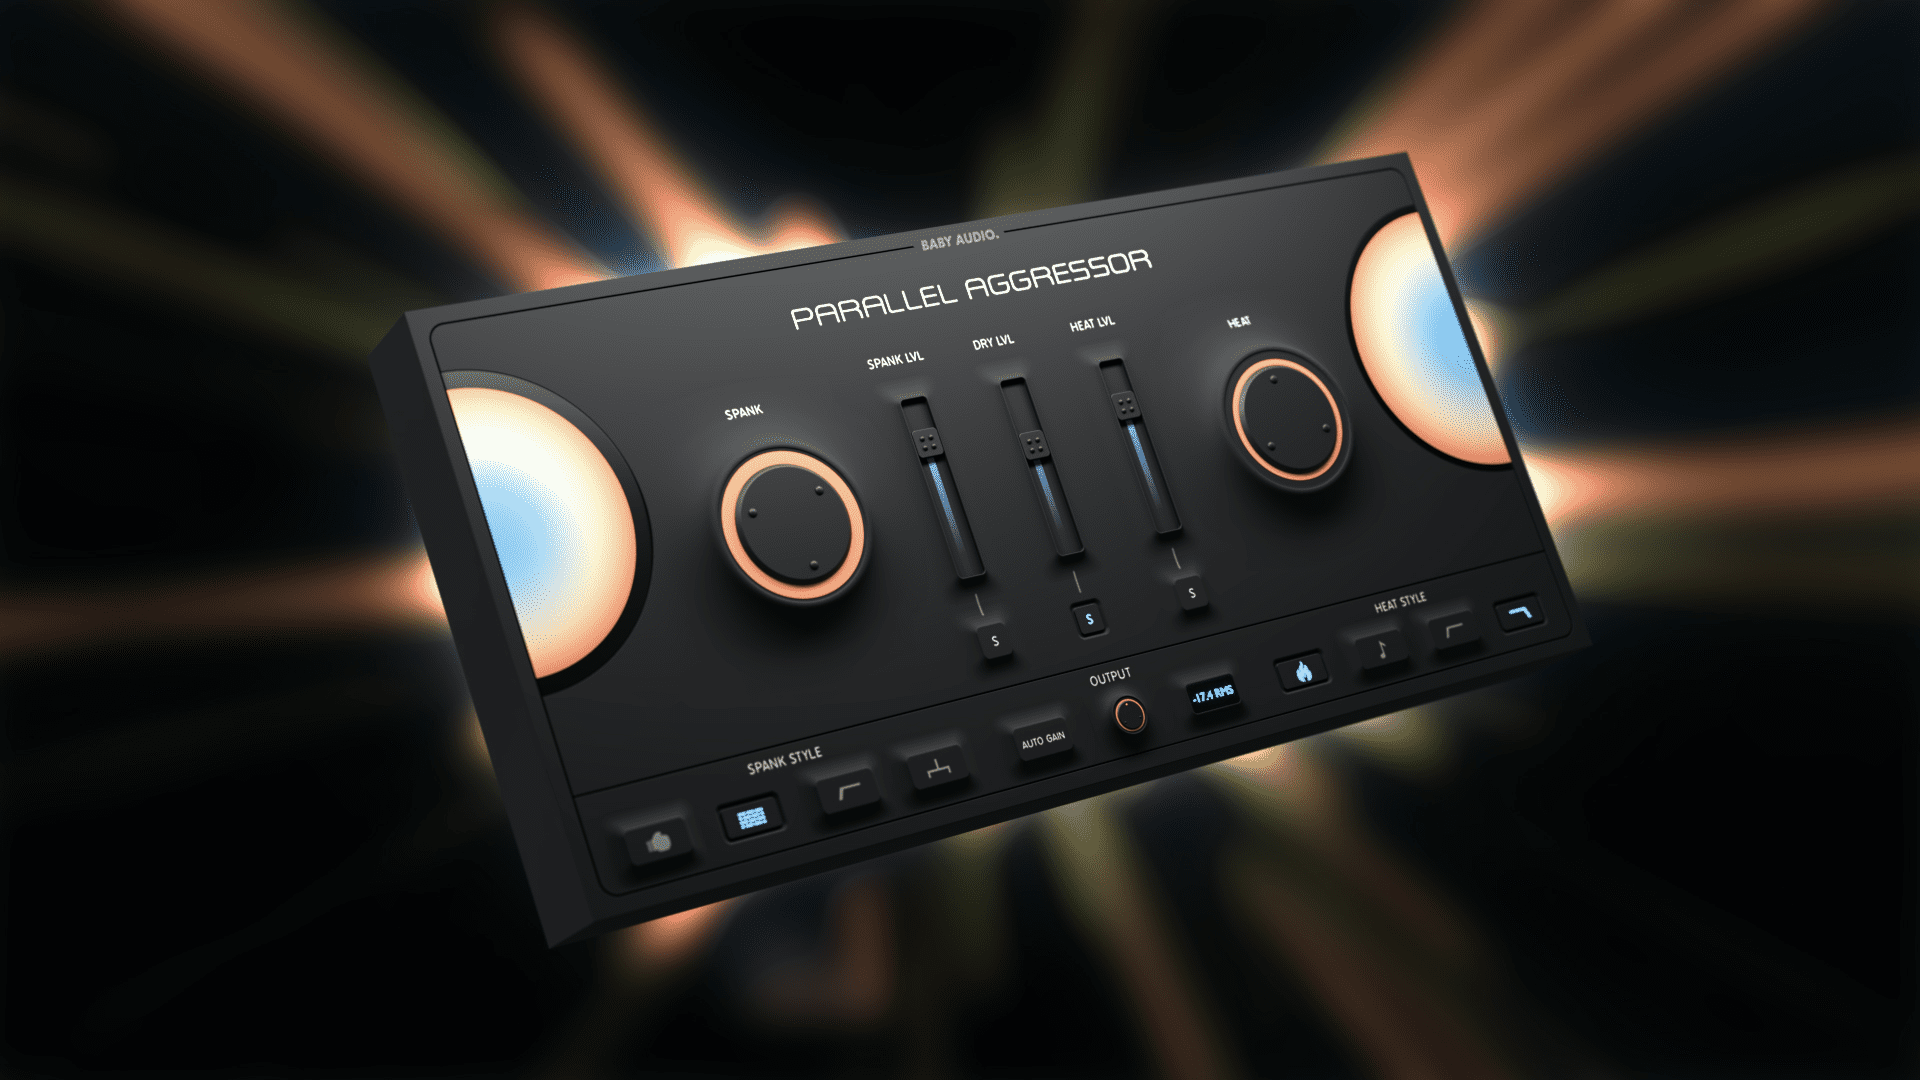 BABY Audio Launches Parallel Aggressor